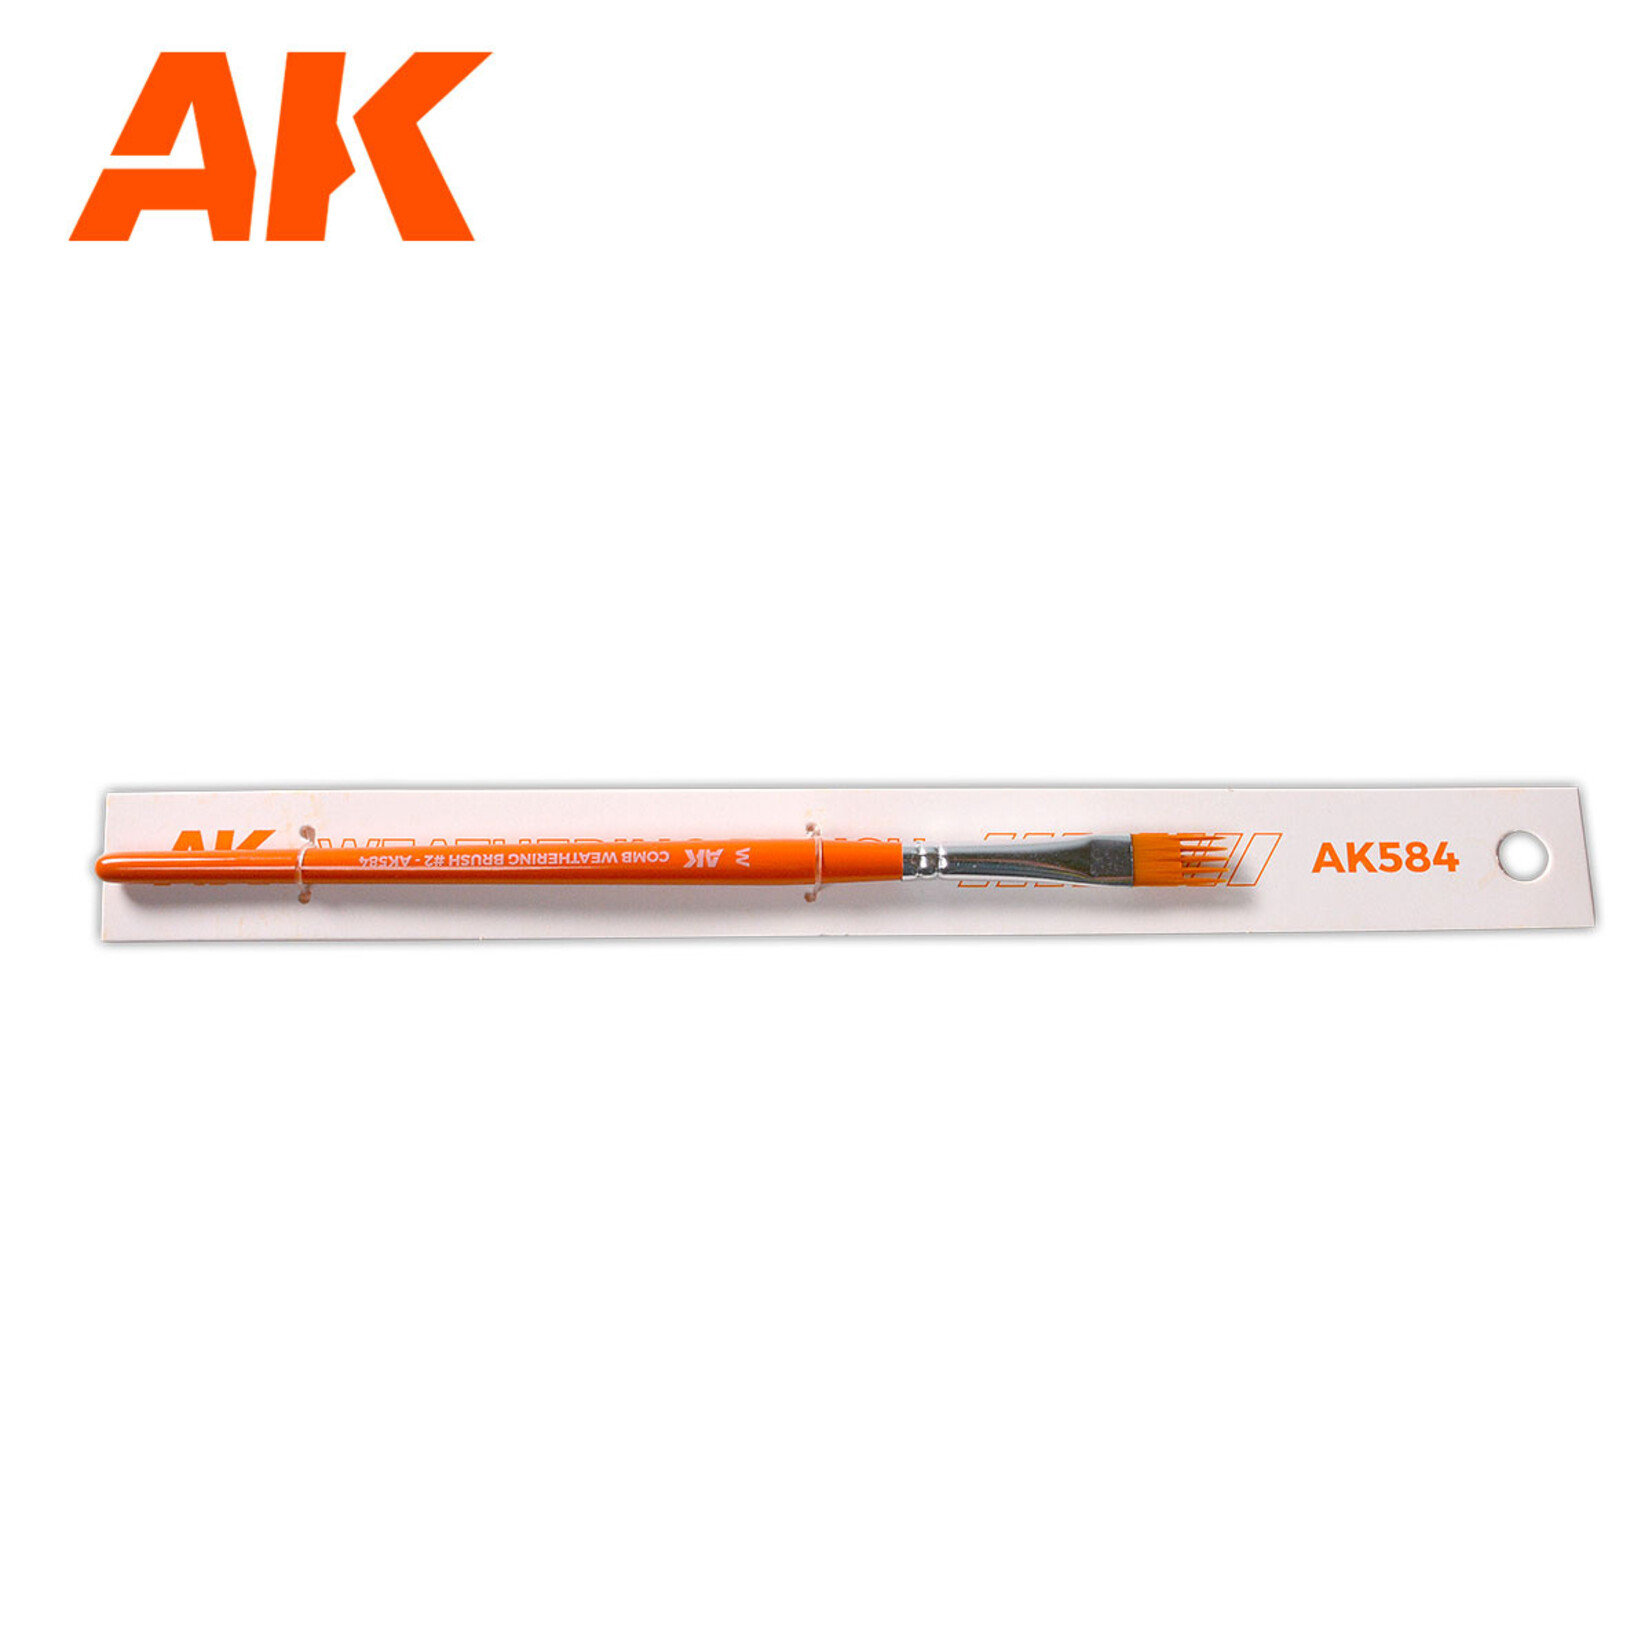 AK Interactive AK584 Synthetic Comb Weathering Brush #5